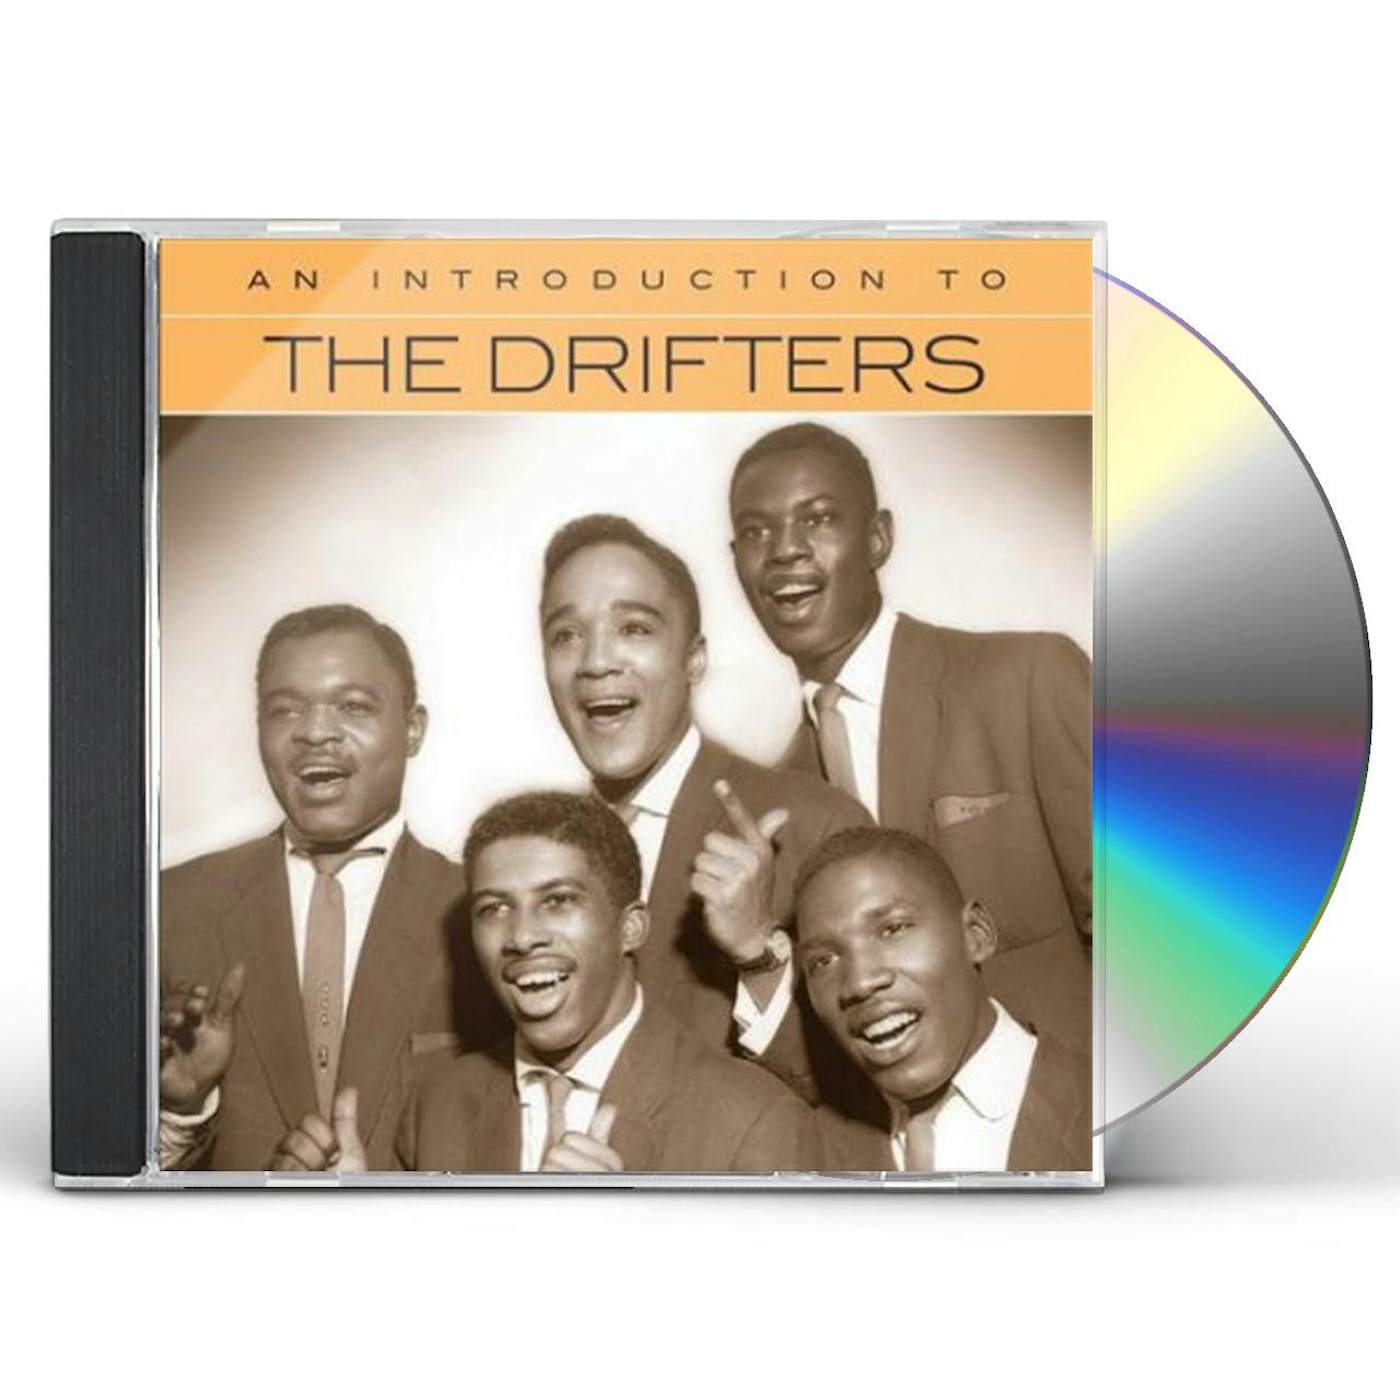 The Drifters AN INTRODUCTION TO CD